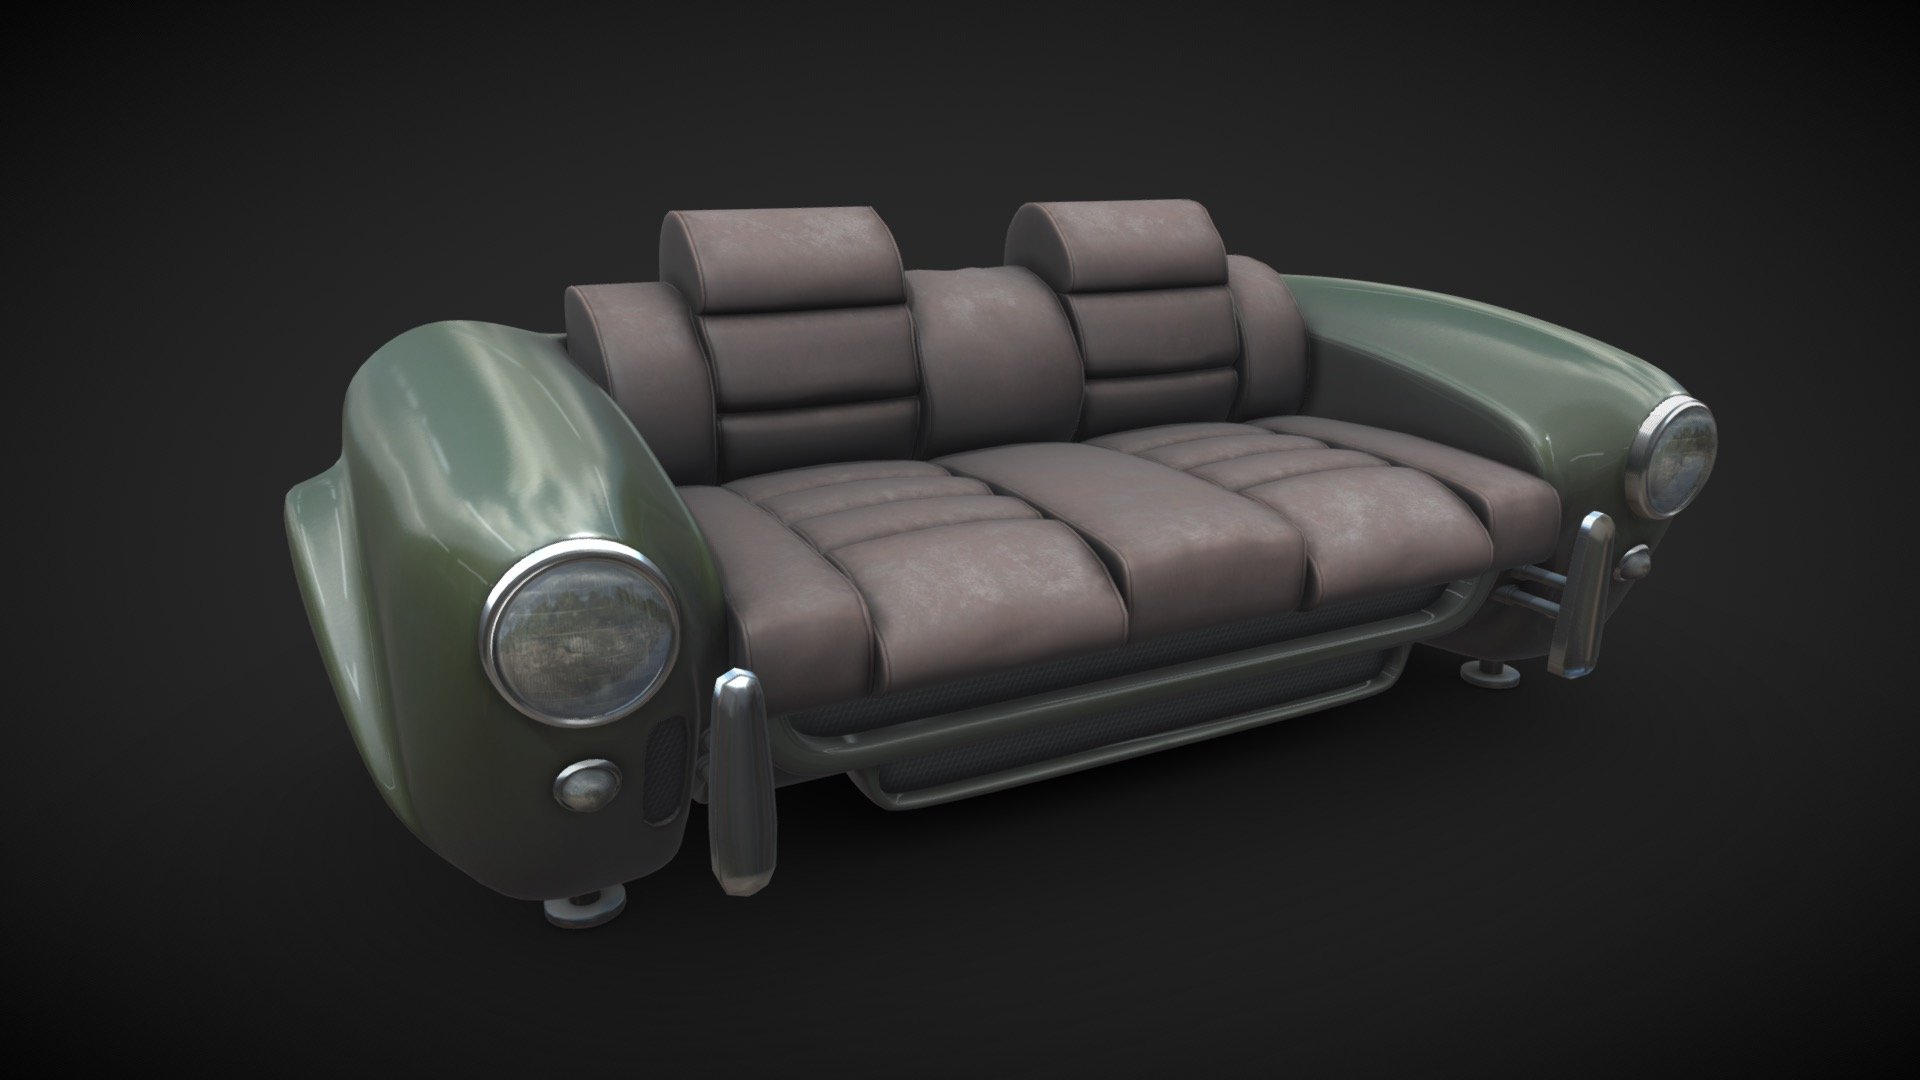 Vintage car sofa.
All parts unwrapped and baked 3d model